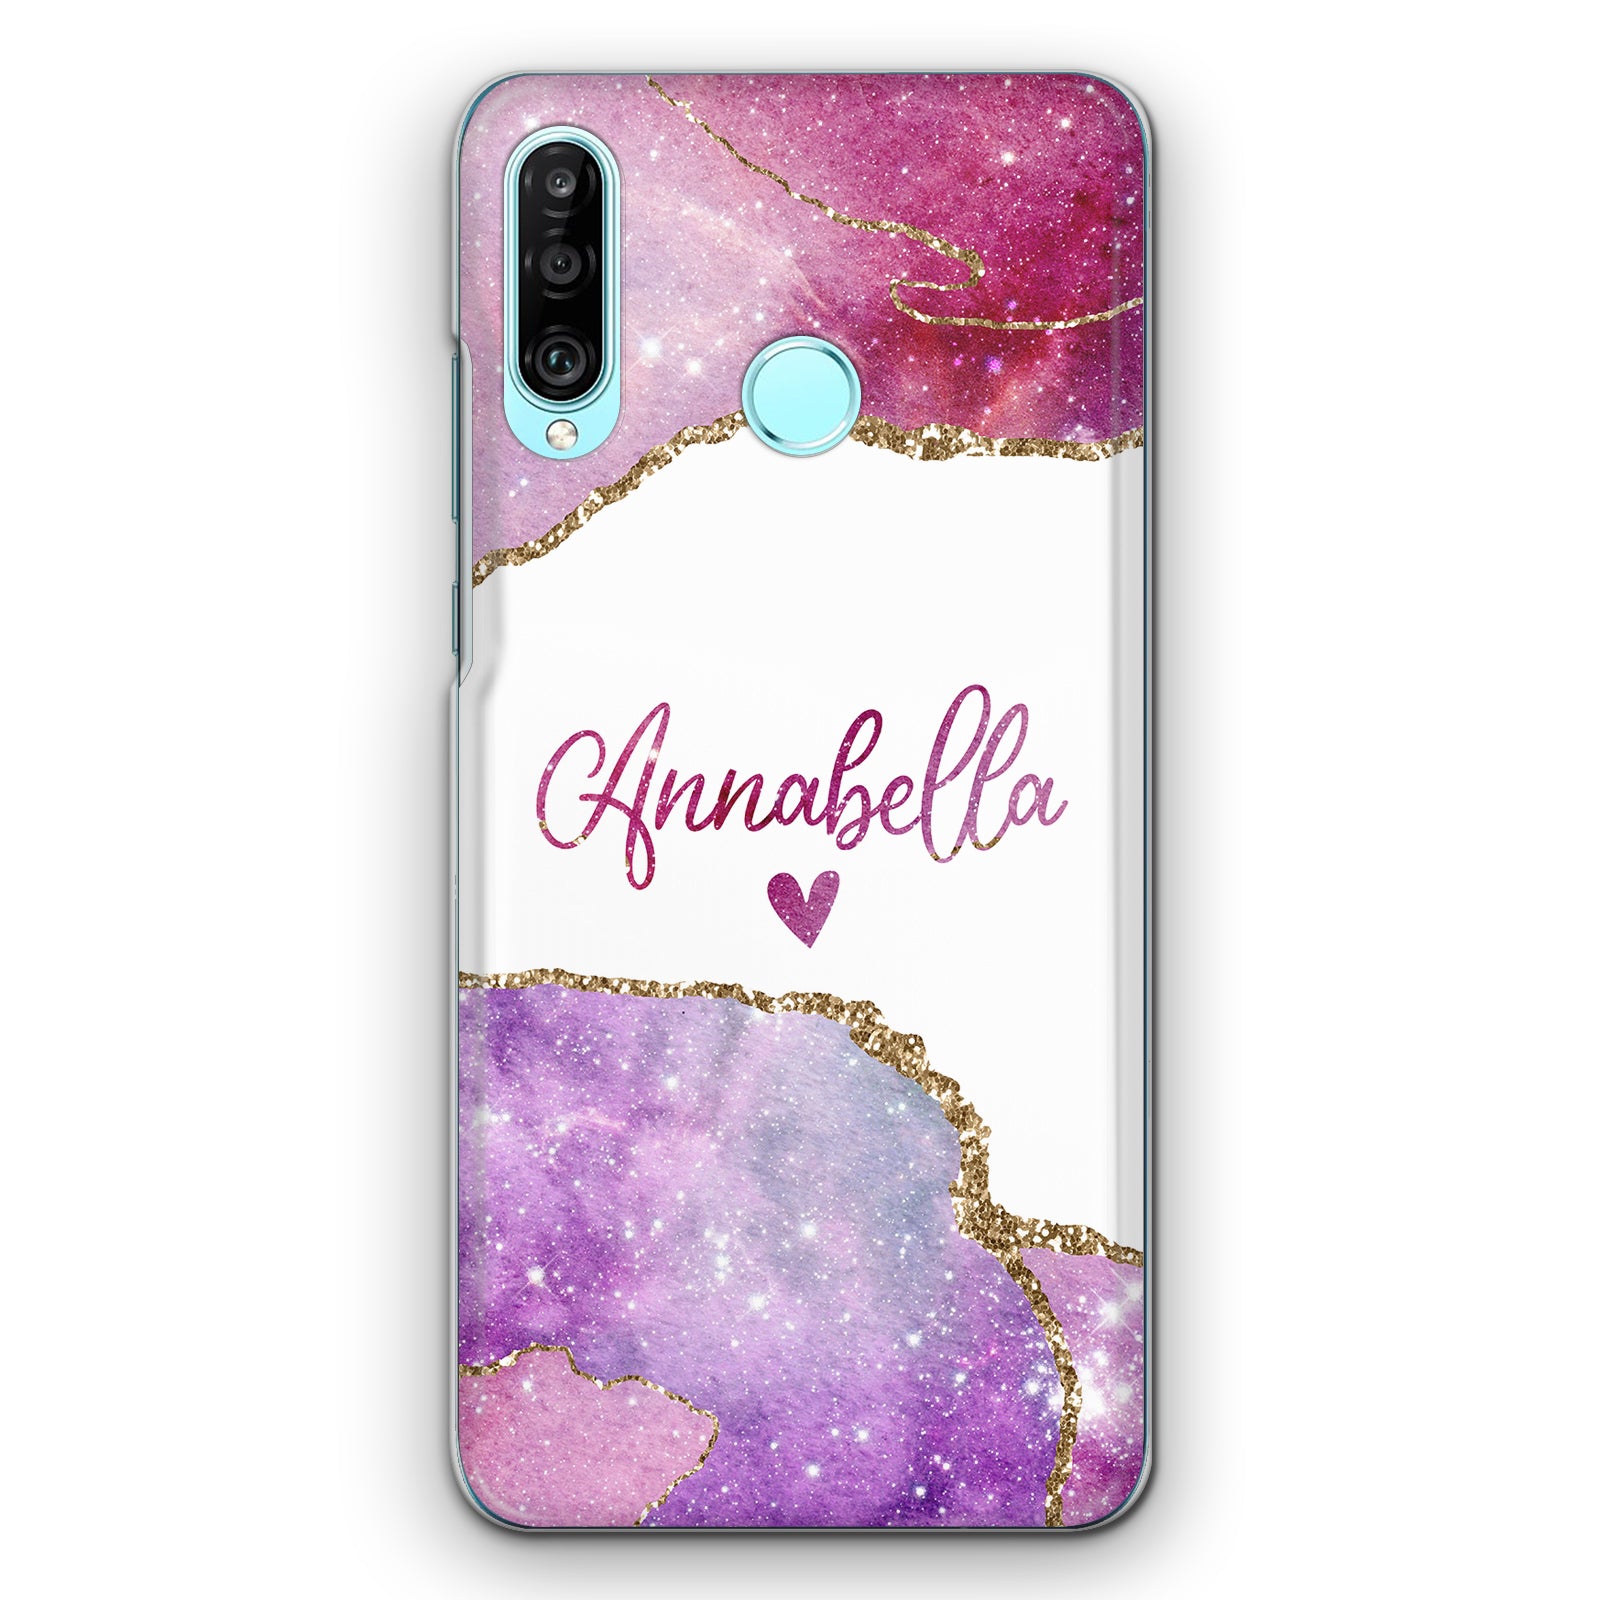 Personalised HTC Phone Hard Case with Heart Accented Text on Rose Pink Marble